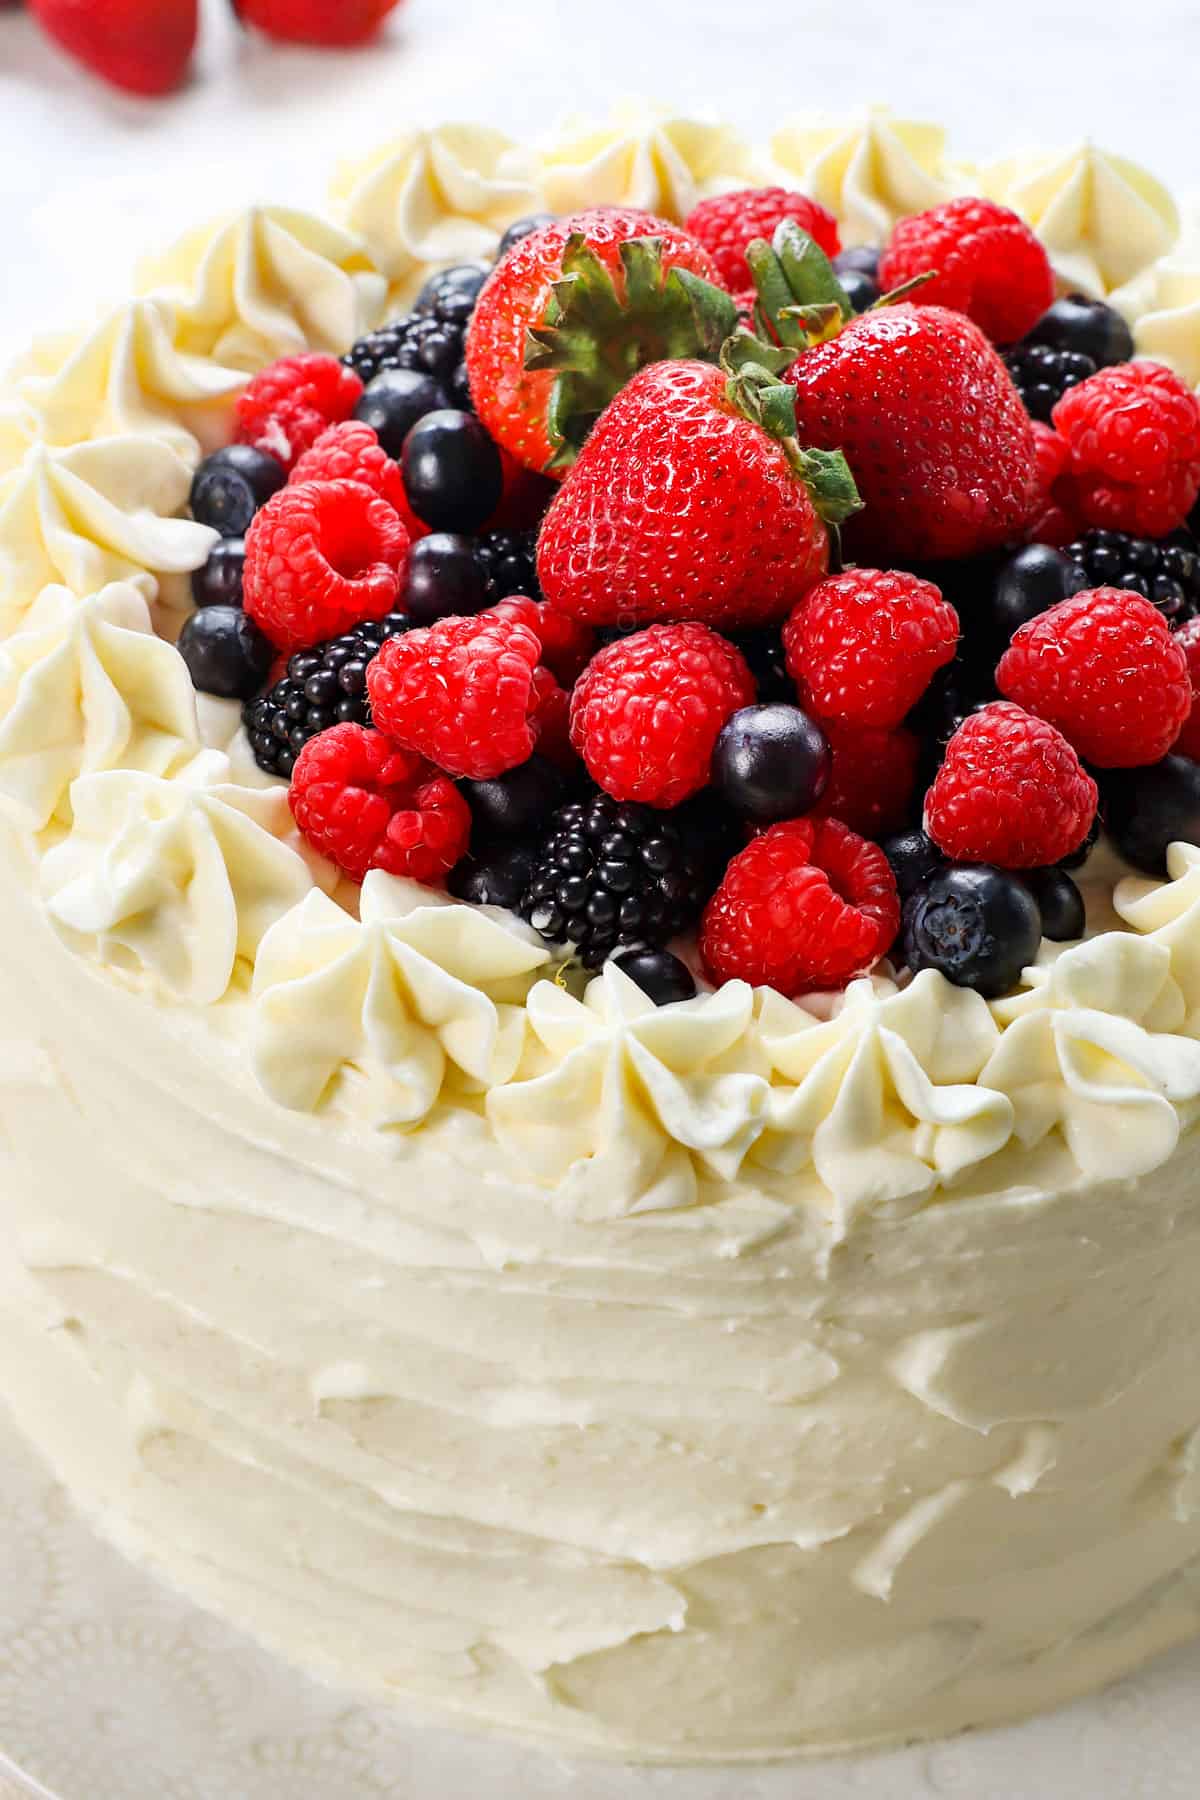 Chantilly cake recipe with Chantilly cream, strawberries, raspberries, blackberries and blueberries